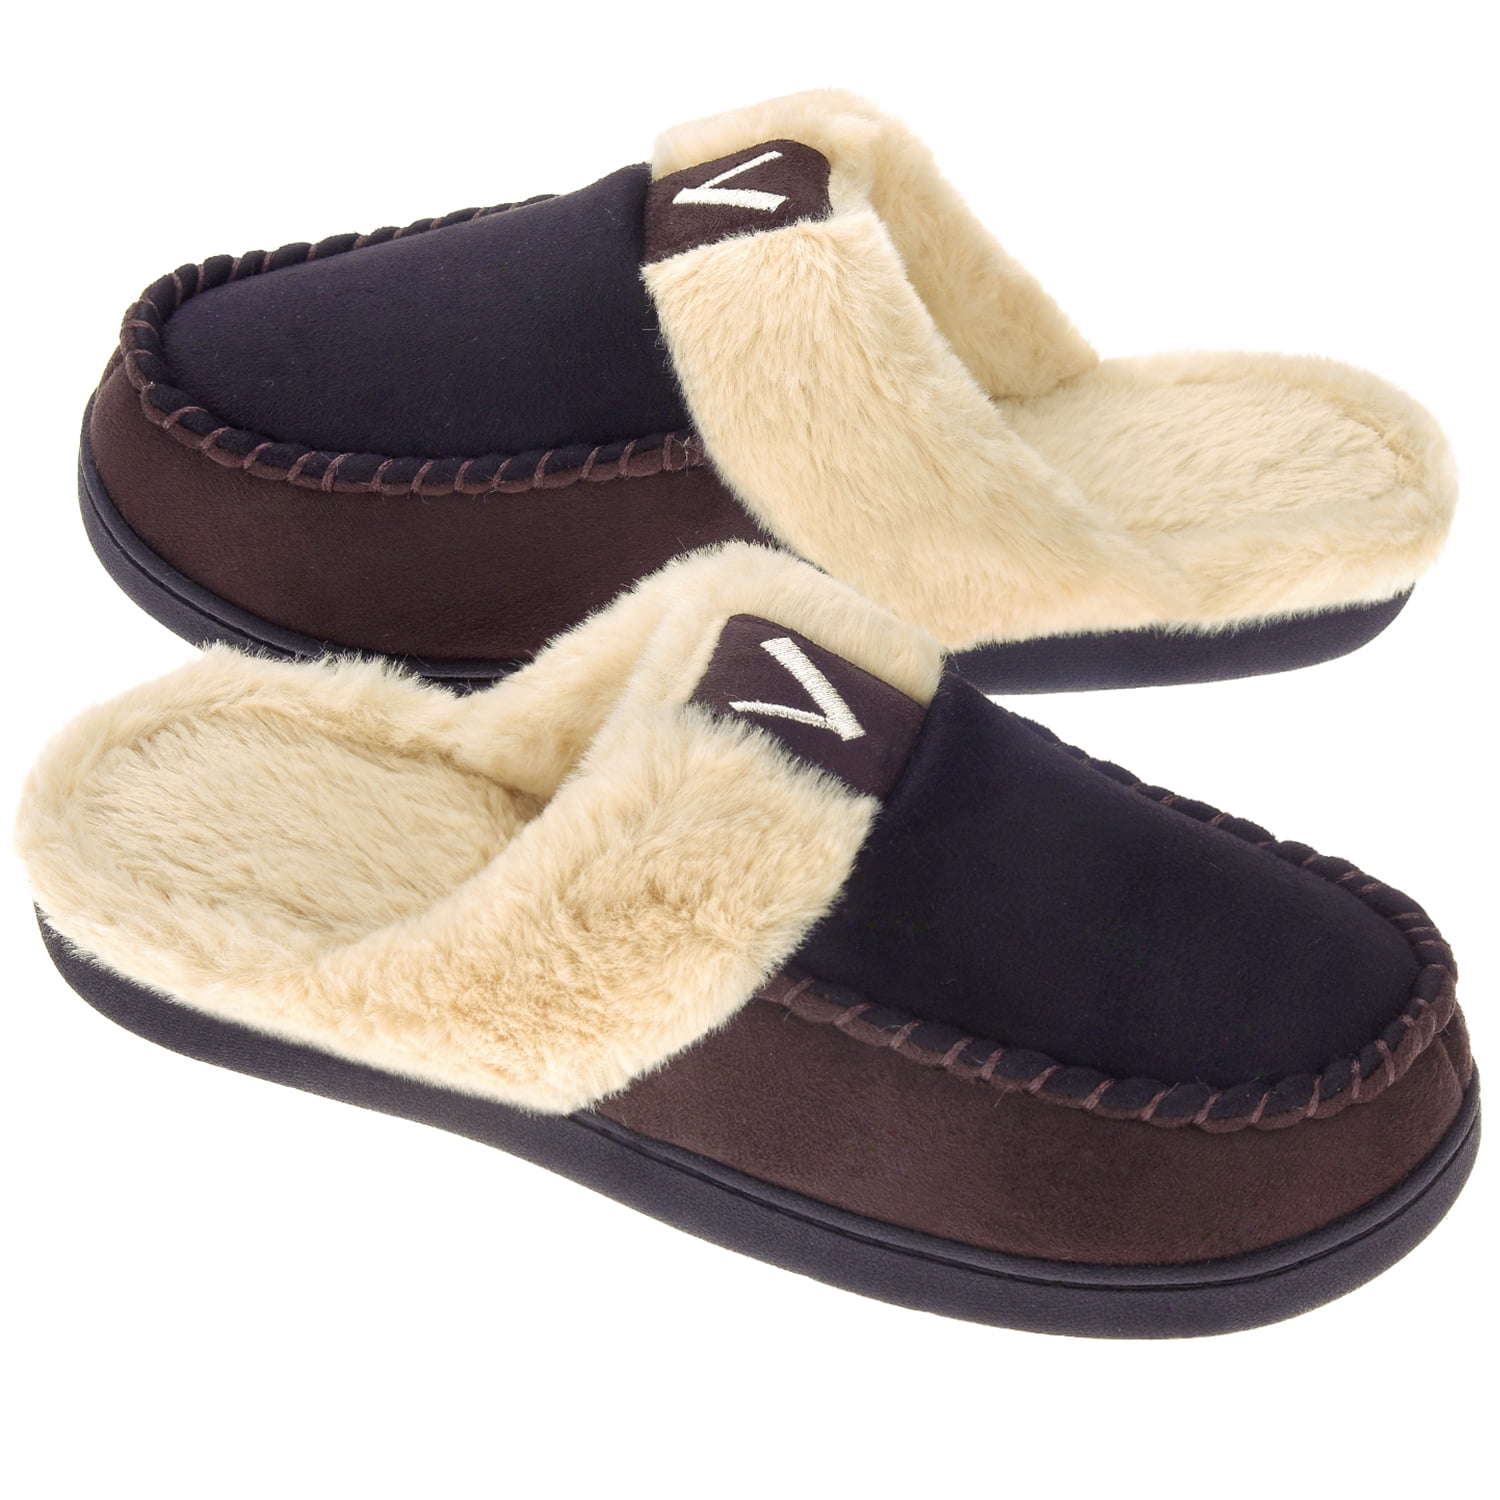 VONMAY Men's Scuff Slippers Memory Foam Slip-on Moccasin Style House Shoes Indoor Outdoor